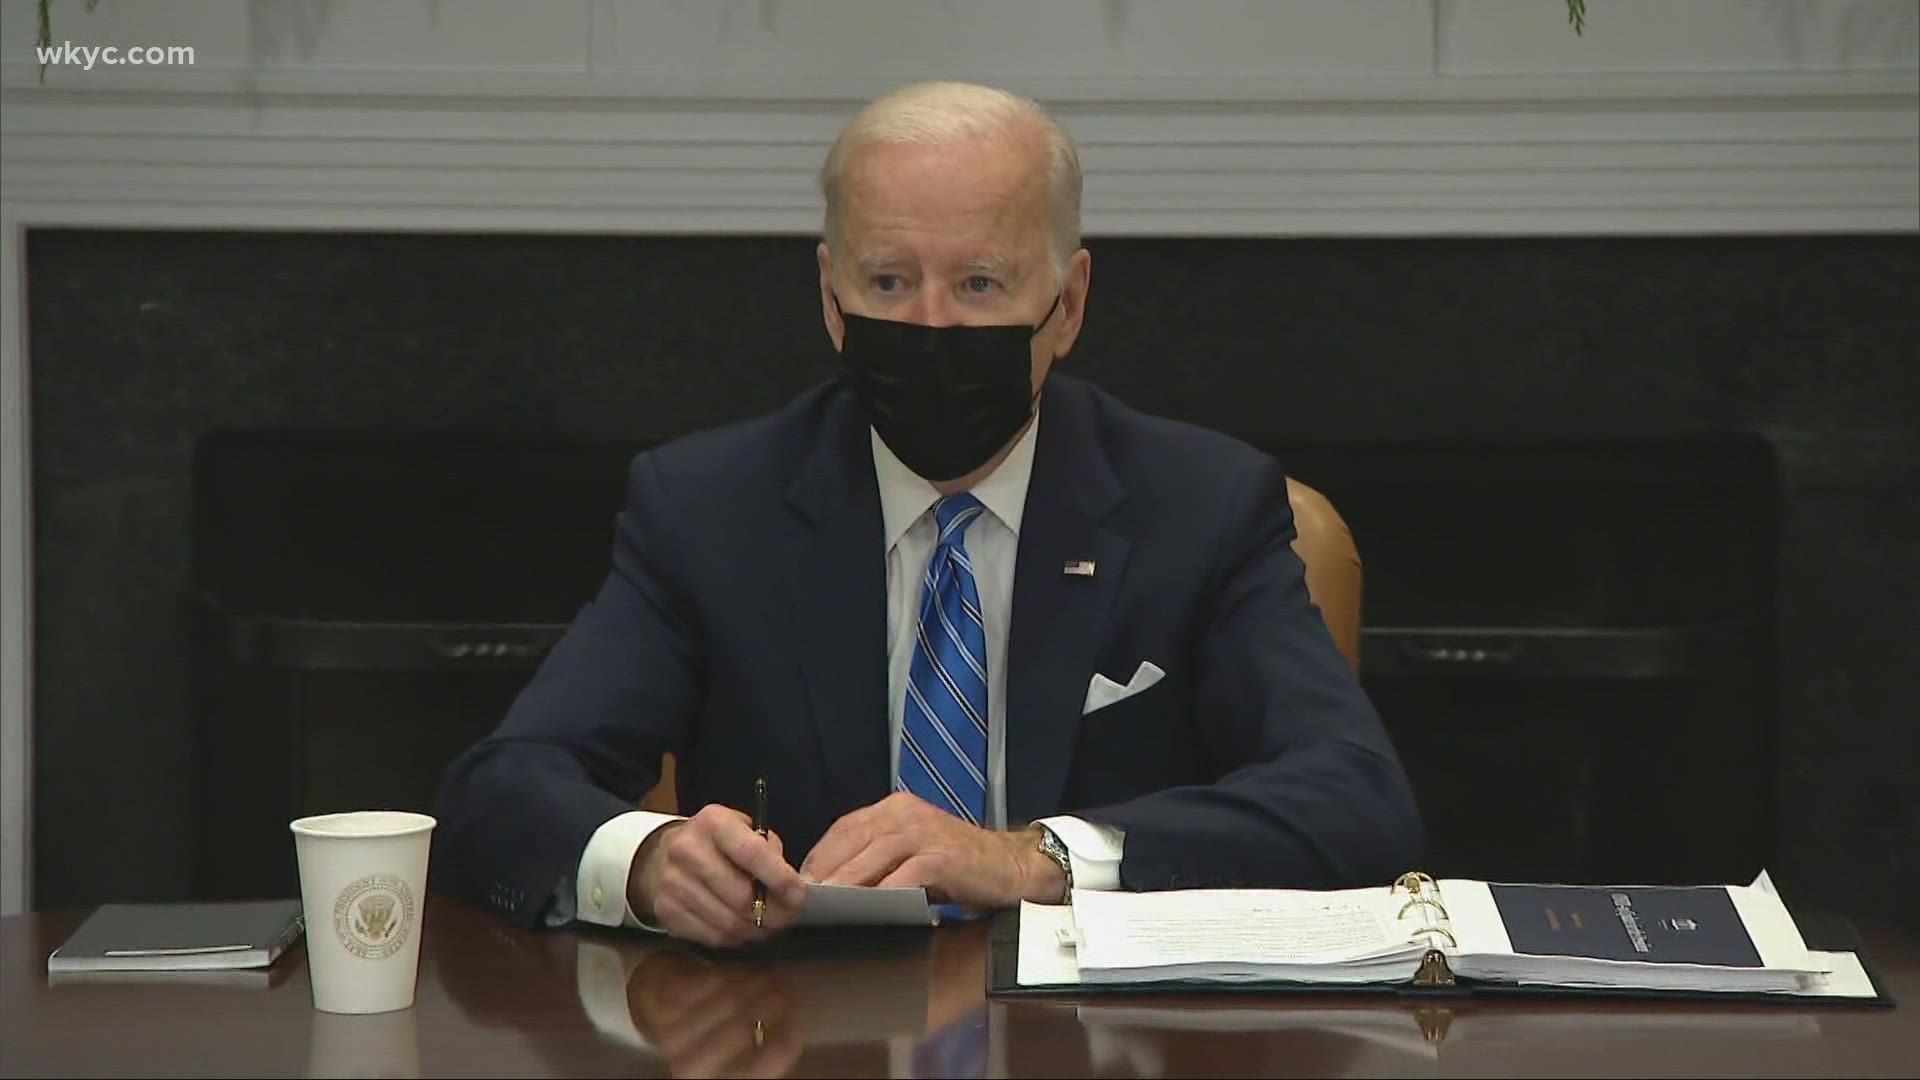 President Biden is expected to stress the importance of getting vaccinated against COVID-19.